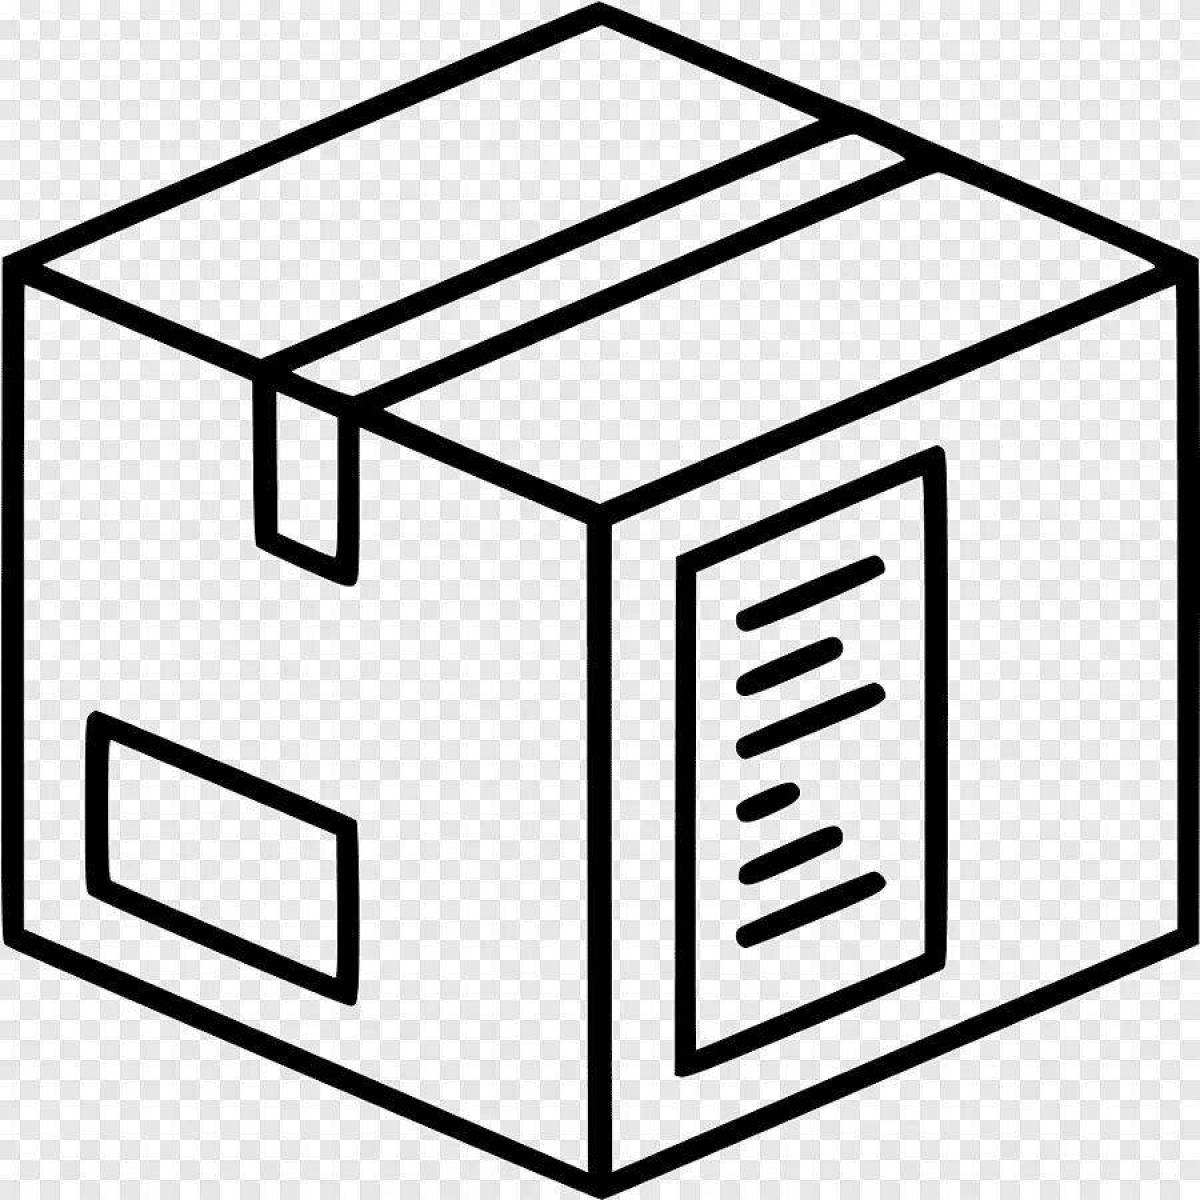 Mystery box coloring page